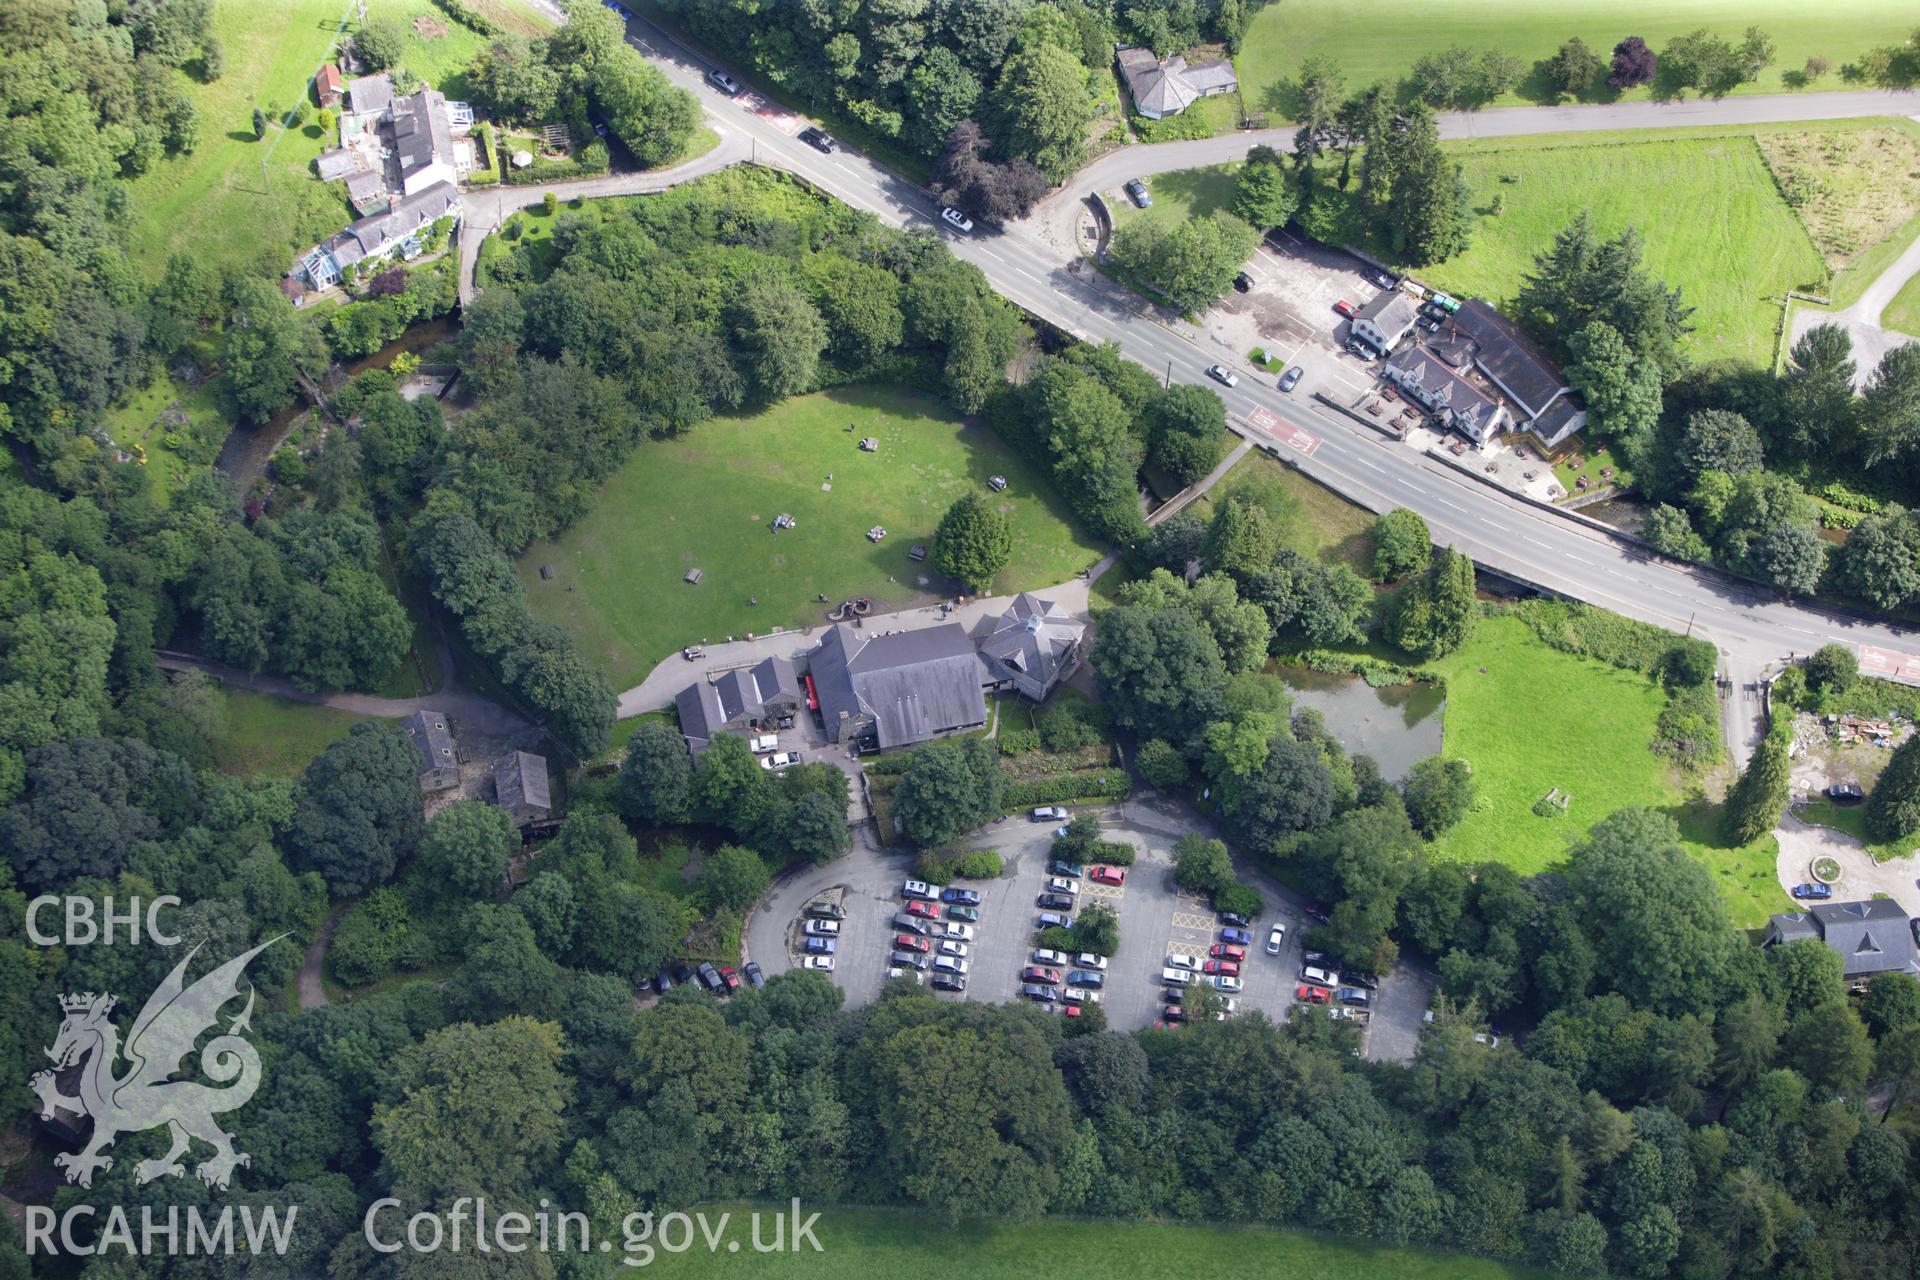 RCAHMW colour oblique aerial photograph of Loggerheads Country Park Visitor Centre. Taken on 30 July 2009 by Toby Driver